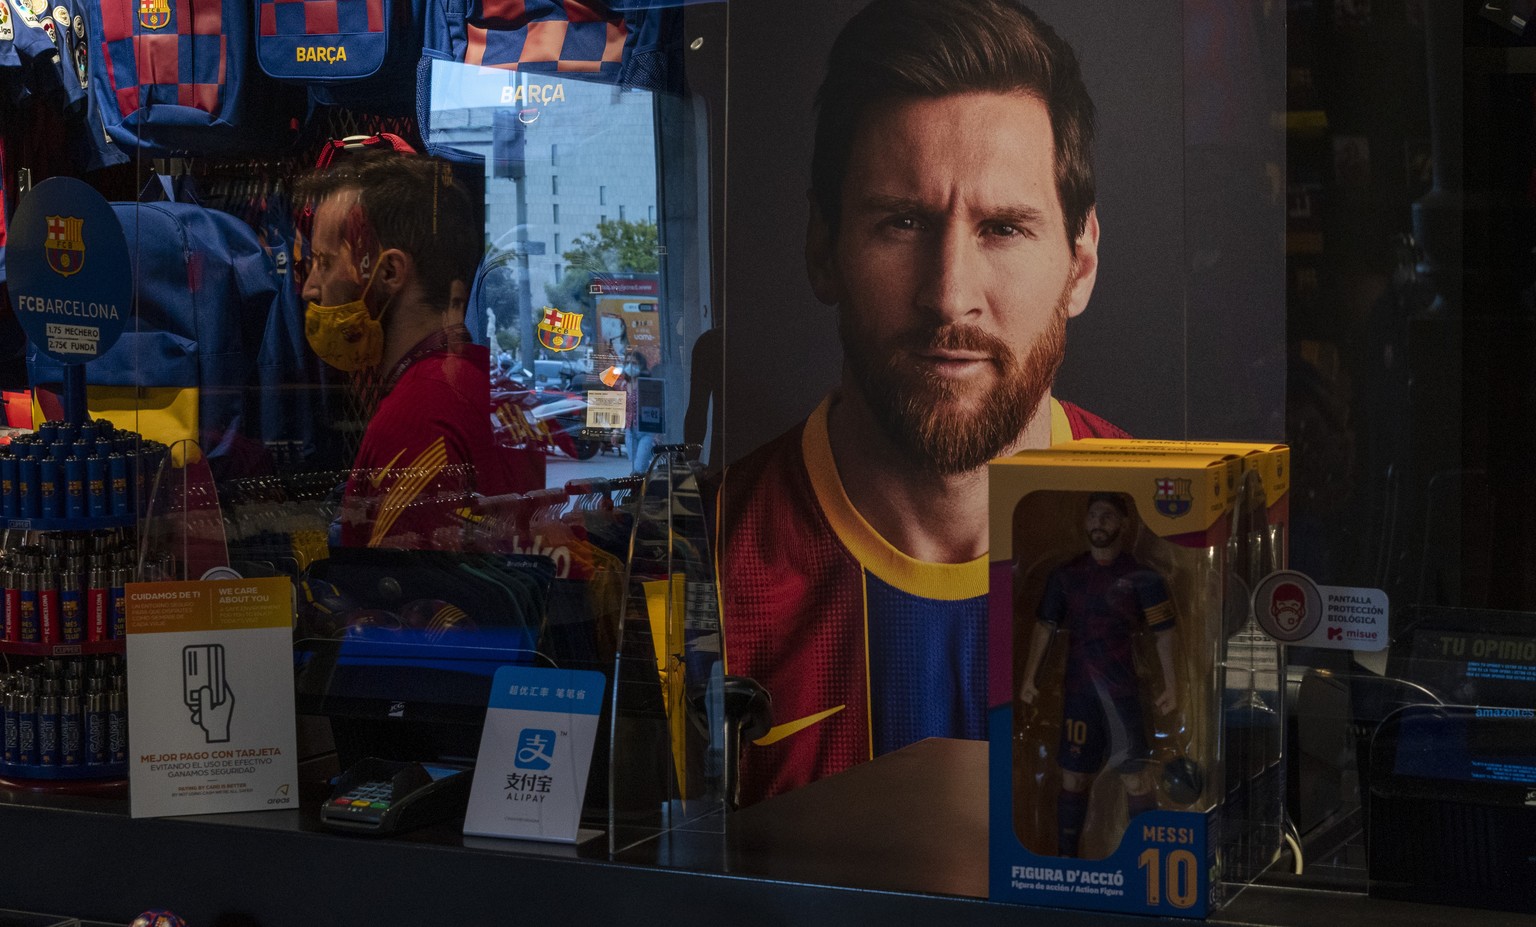 A poster with the face of Barcelona soccer player Lionel Messi is displayed at a F.C. Barcelona store in Barcelona, Spain on Tuesday, Sept. 1, 2020. Barcelona is banking on a face-to-face meeting with ...